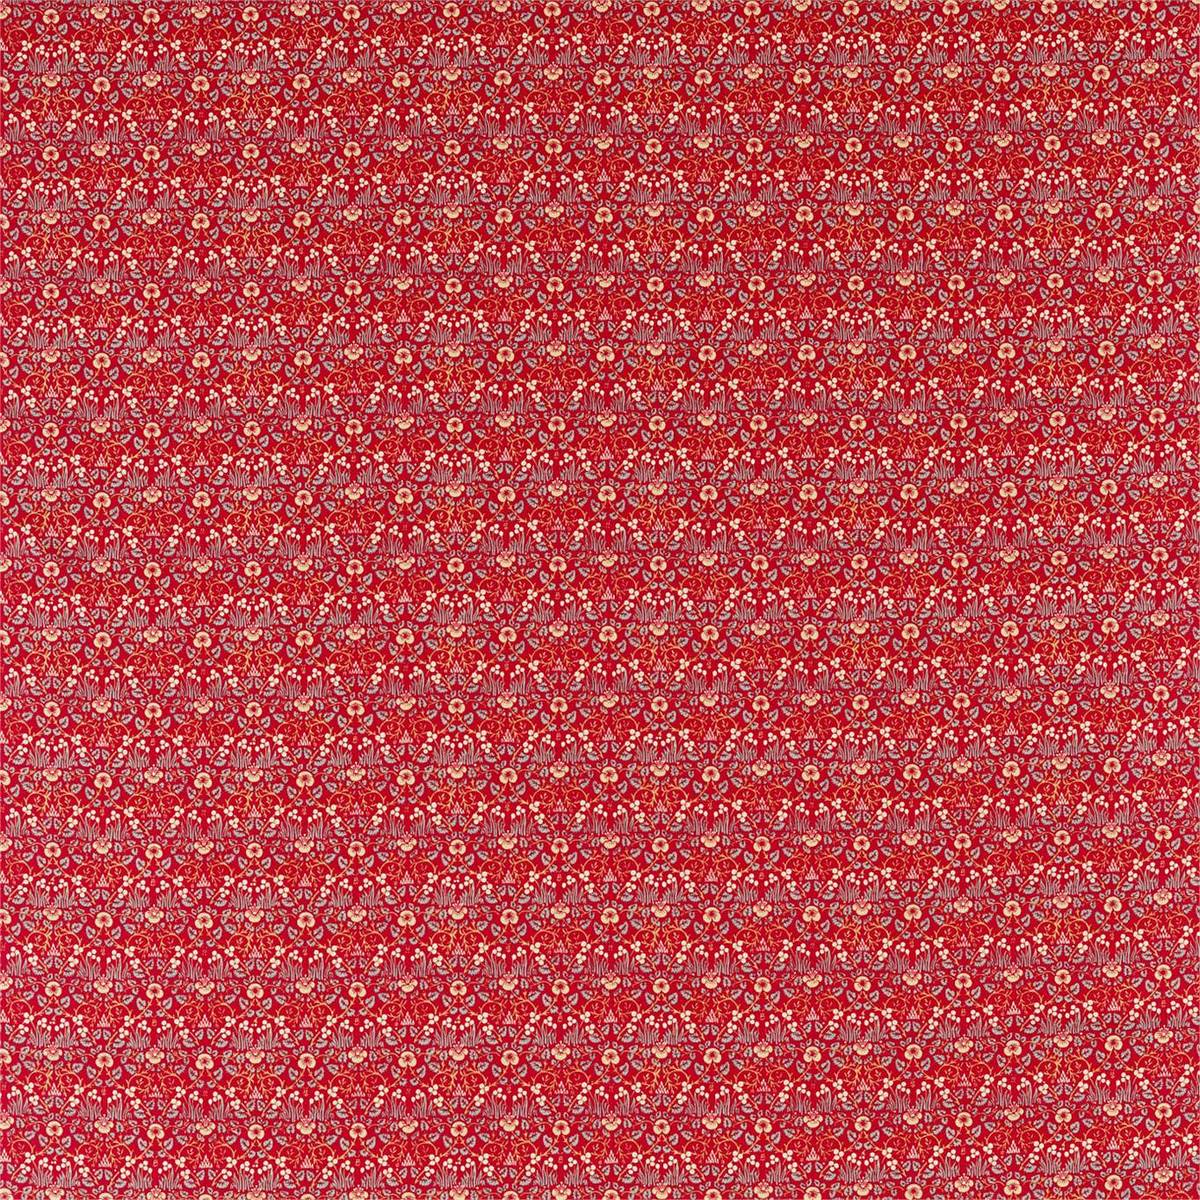 Eye Bright Red Fabric by William Morris & Co.